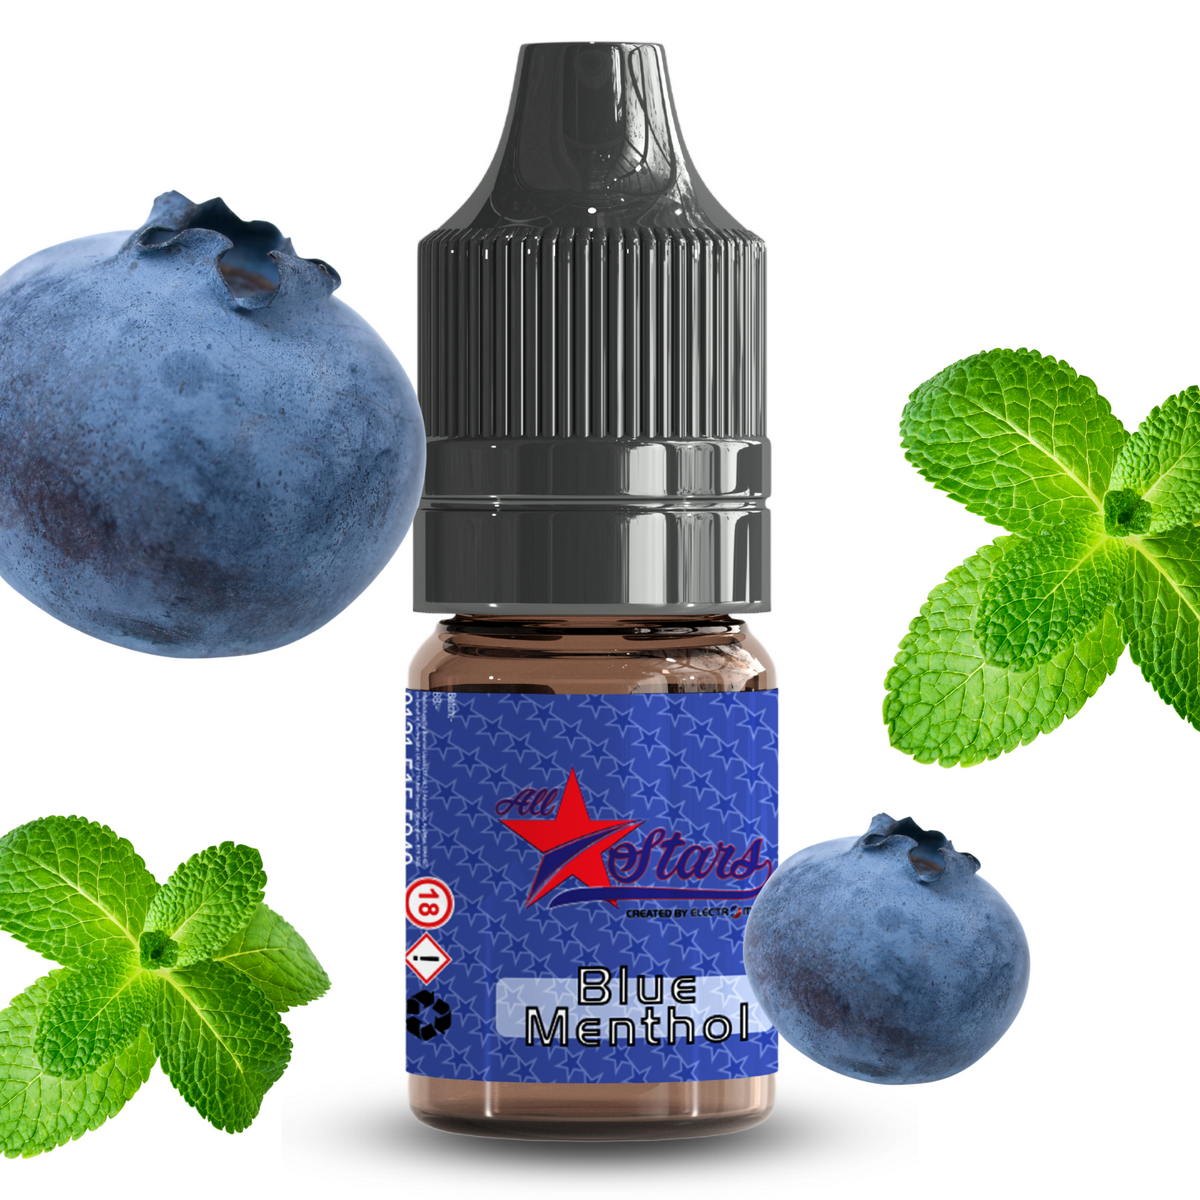 All Stars E-Liquid from the vape brand you can trust, Electromist, . Get your taste buds ready for a flavour sensation, Blue Menthol Nicotine Content: 6mg/12mg/18mg Products may contain nicotine. For over 18s Only ejuice, vape pen, eliquid, e cigarette, 10ml, vaping, cloud, PG, VG, 60/40, vape liquid, Flavour